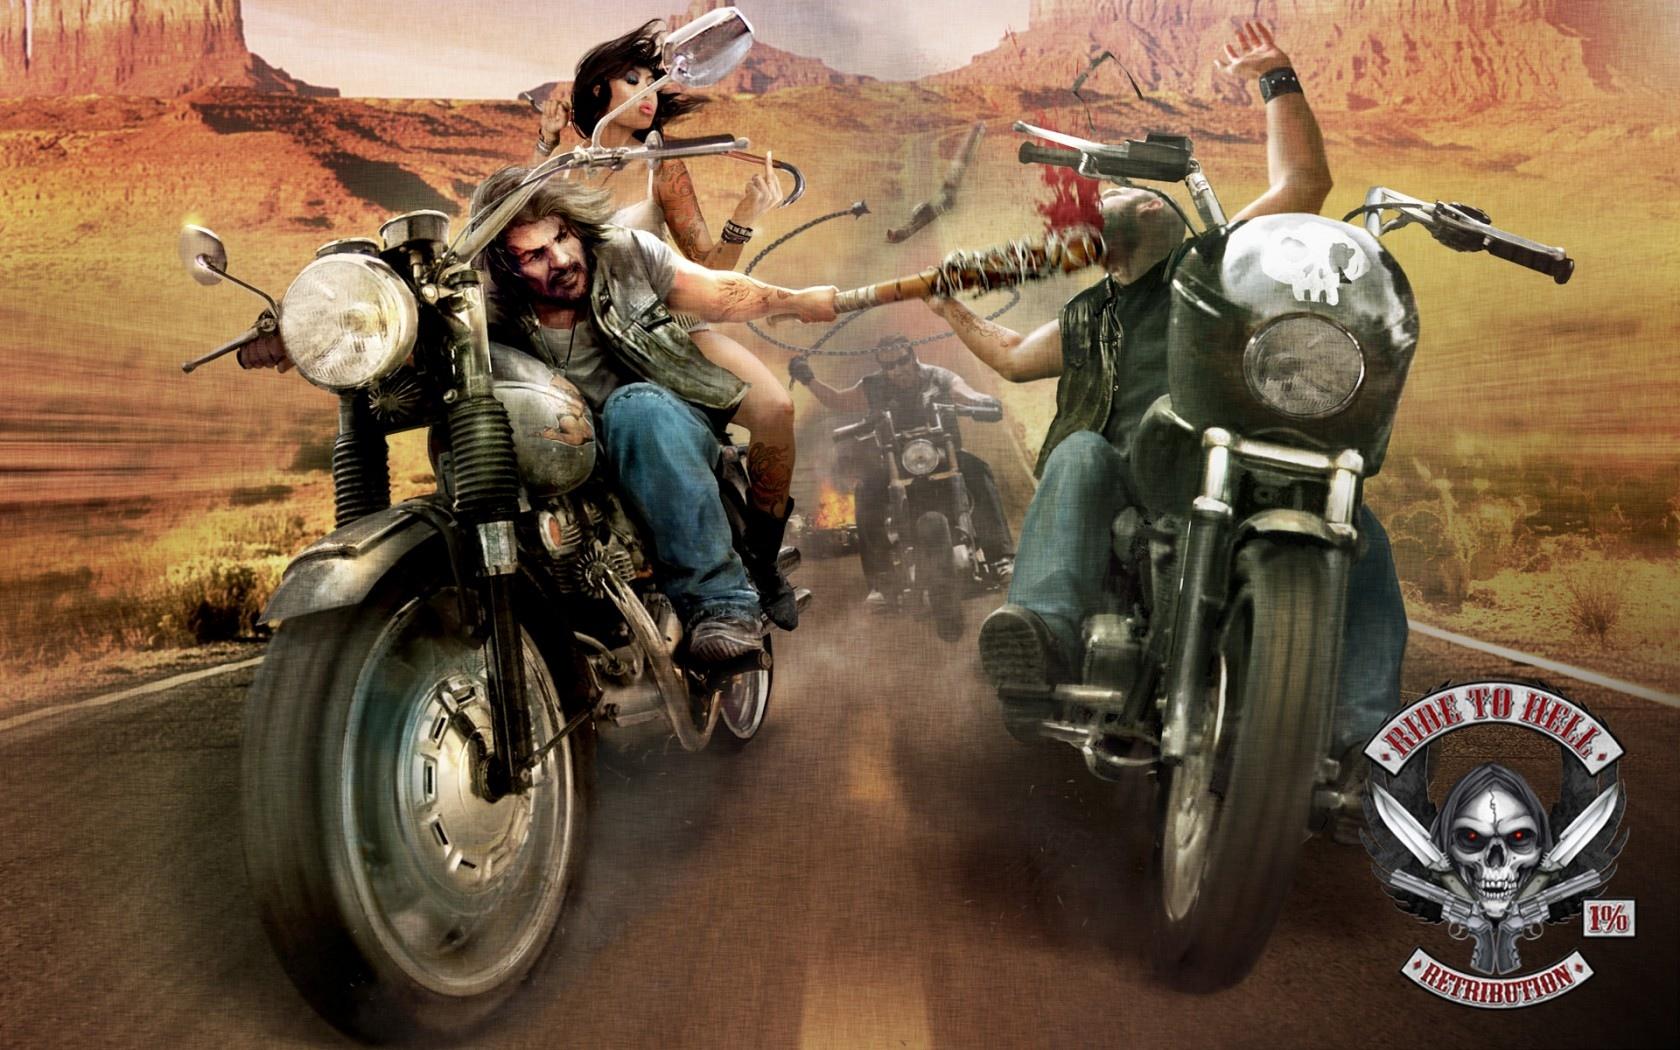 easy rider wallpaper,motorcycle,motorcycling,vehicle,adventure game,fictional character